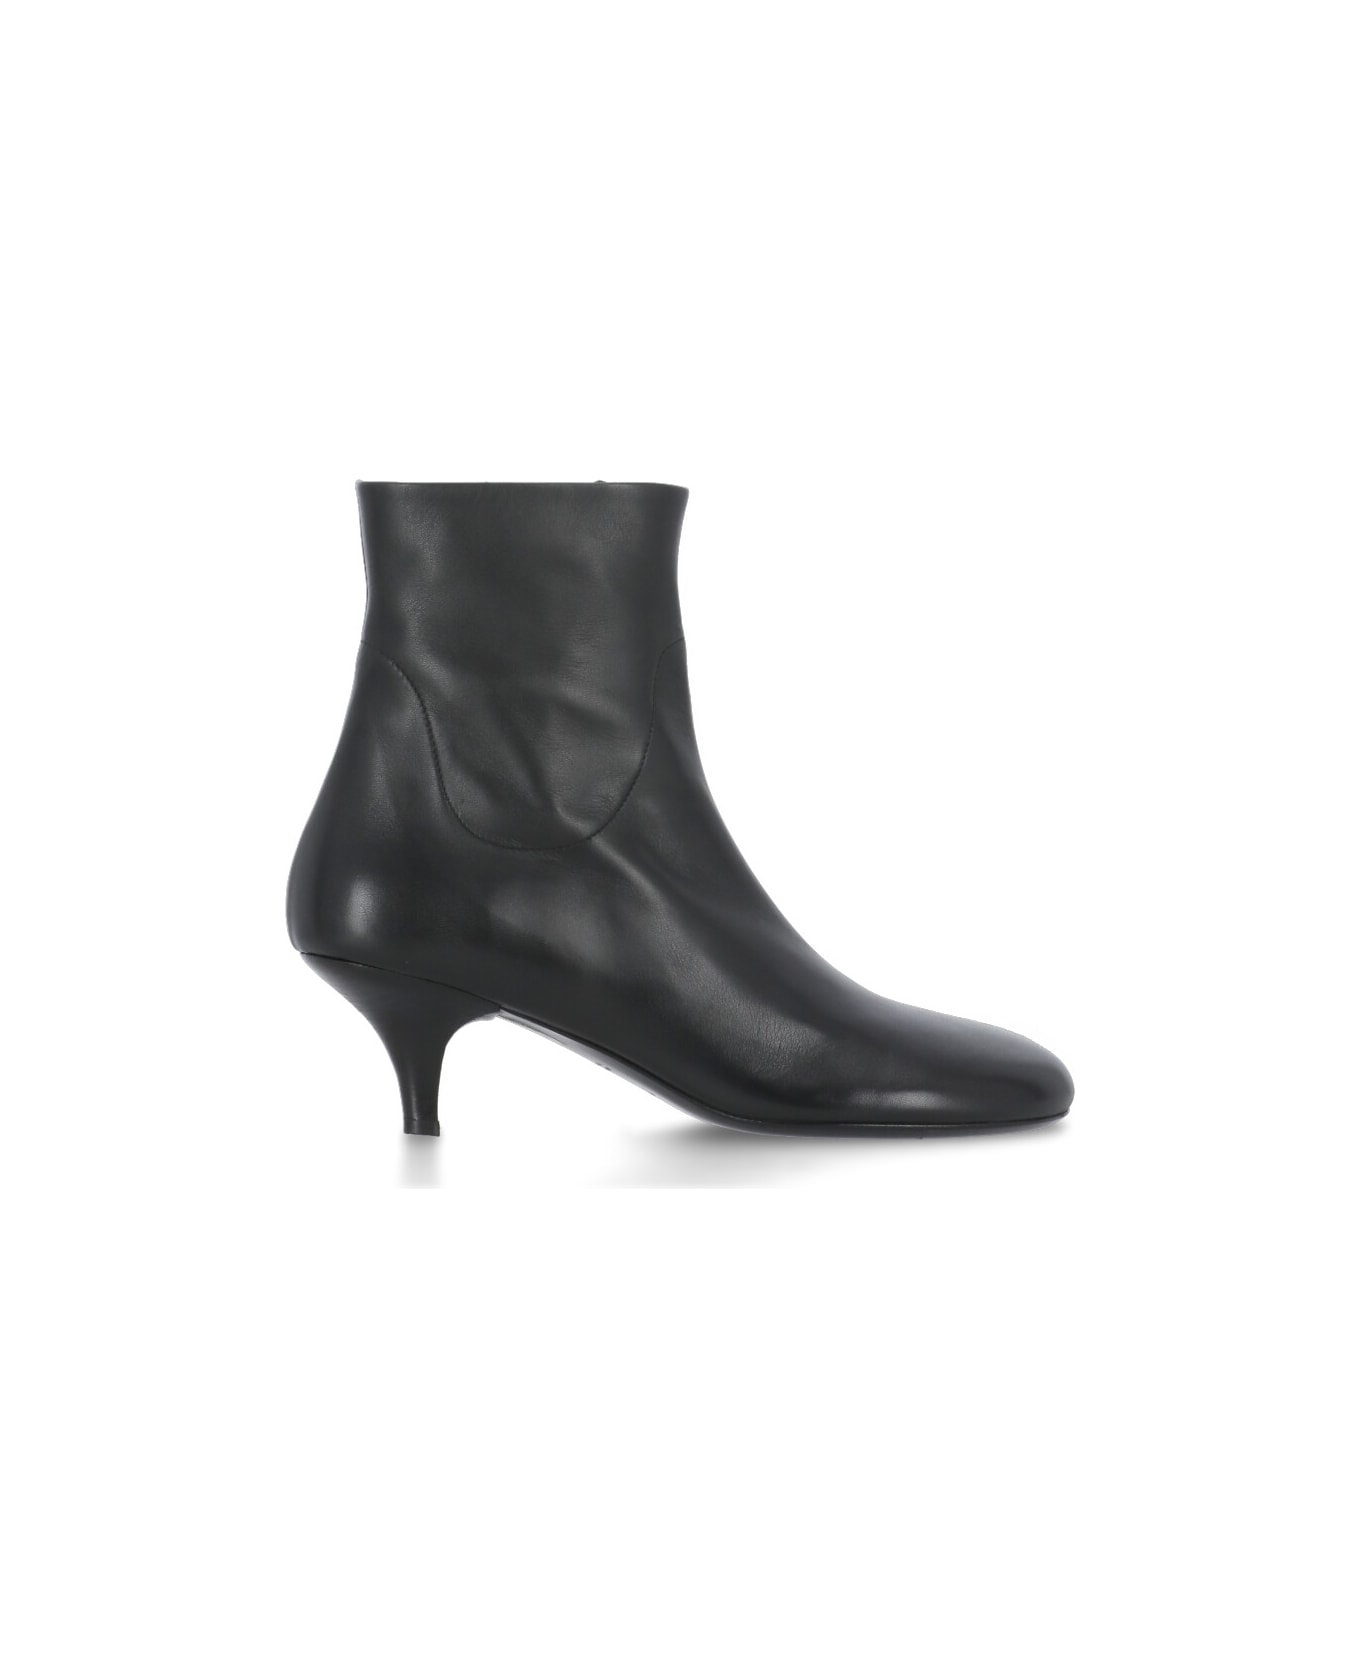 Marsell Spilla Ankle Boots - Black ブーツ